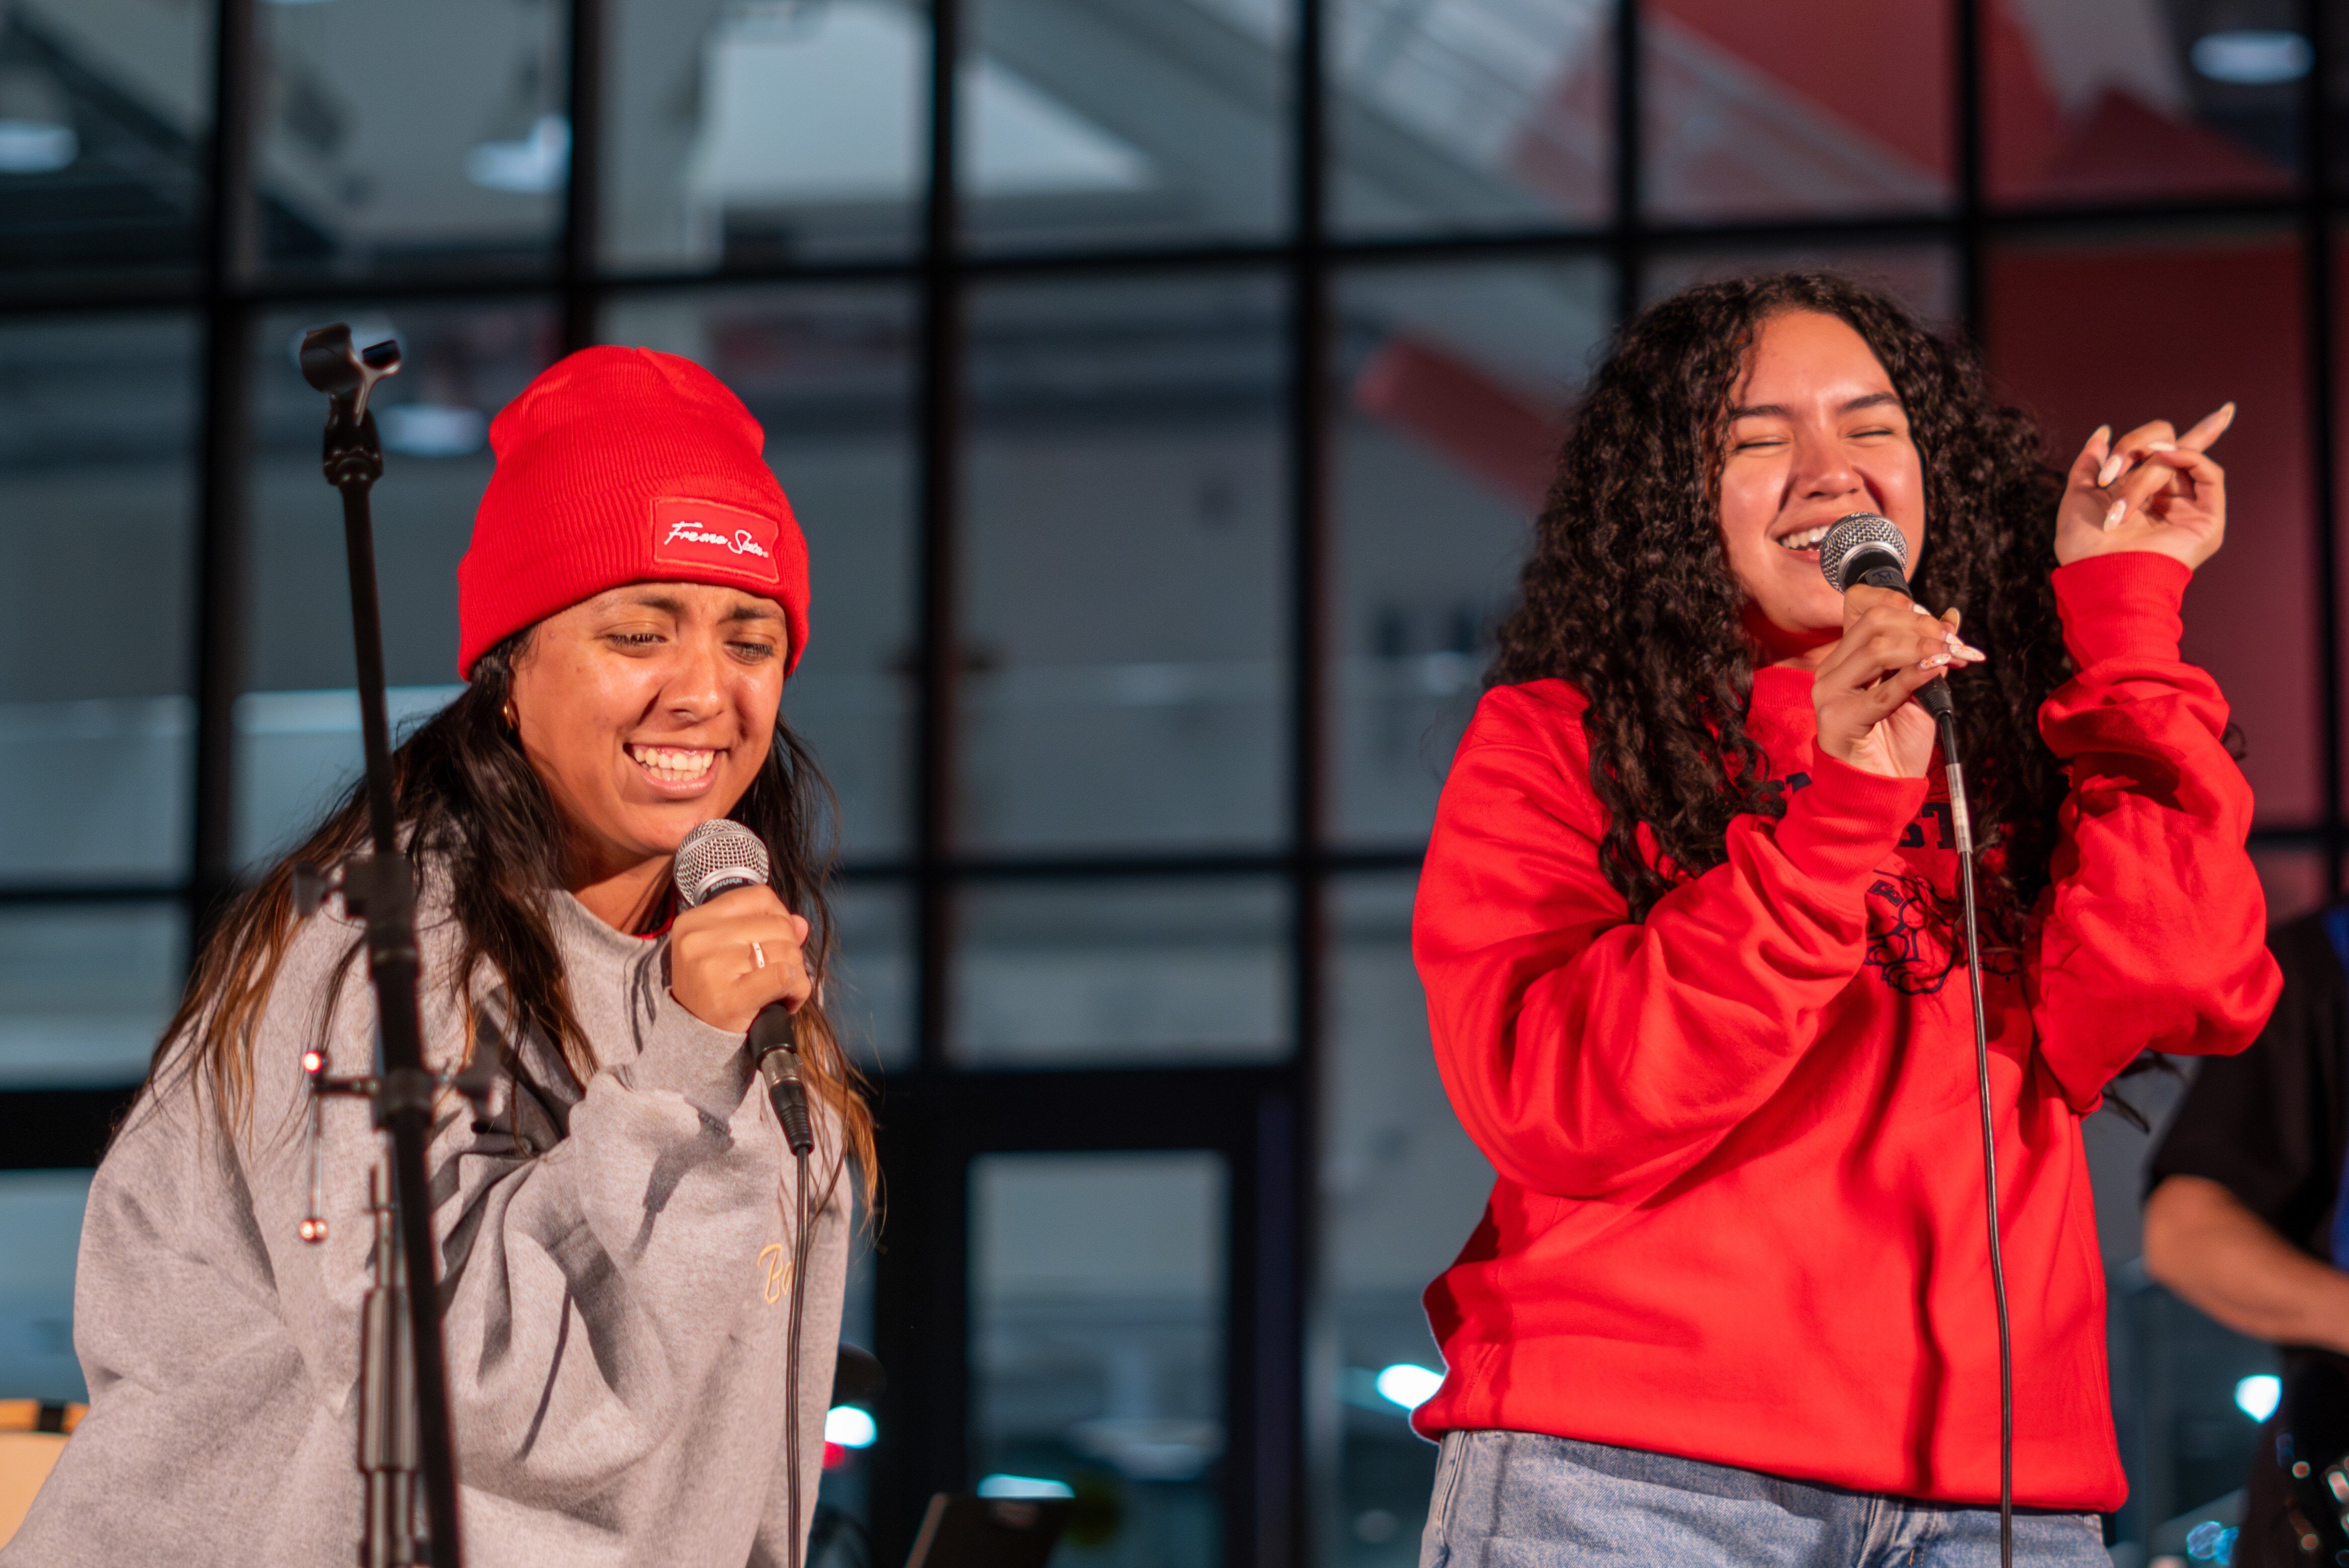 Two students singing at a karaoke event